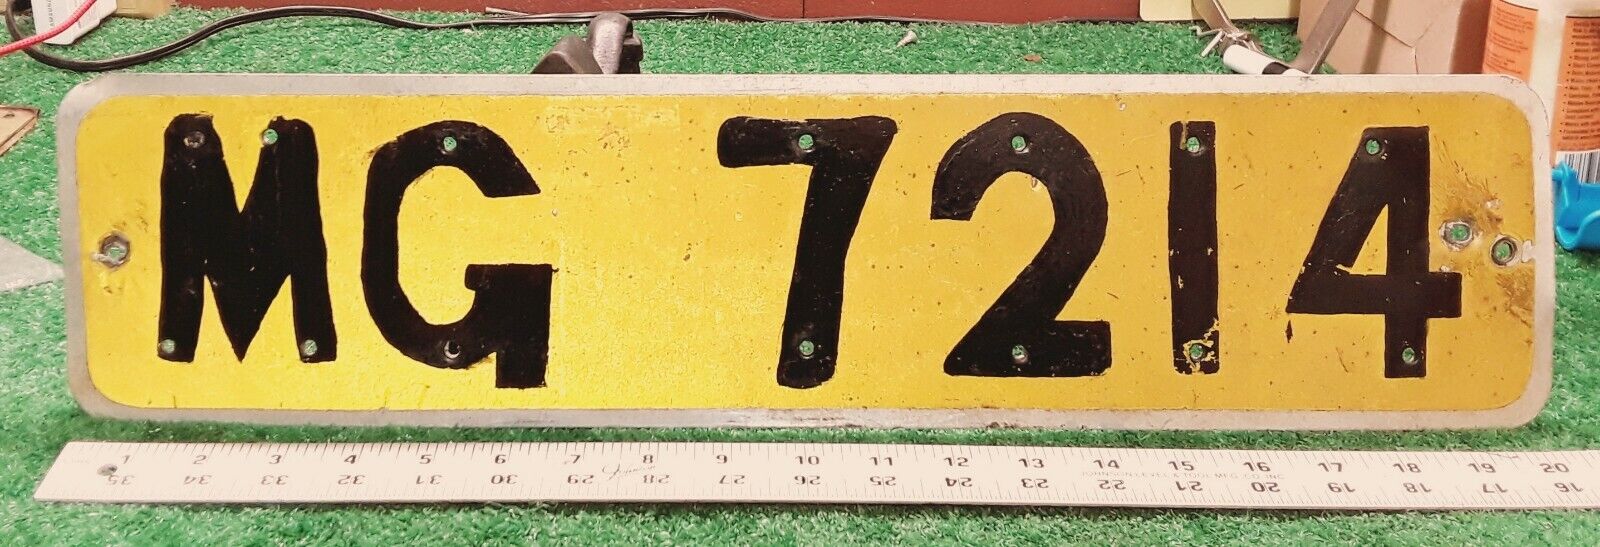 INTL - MALAWI - Early 1970s GOVT VEHICLE license plate - tough type